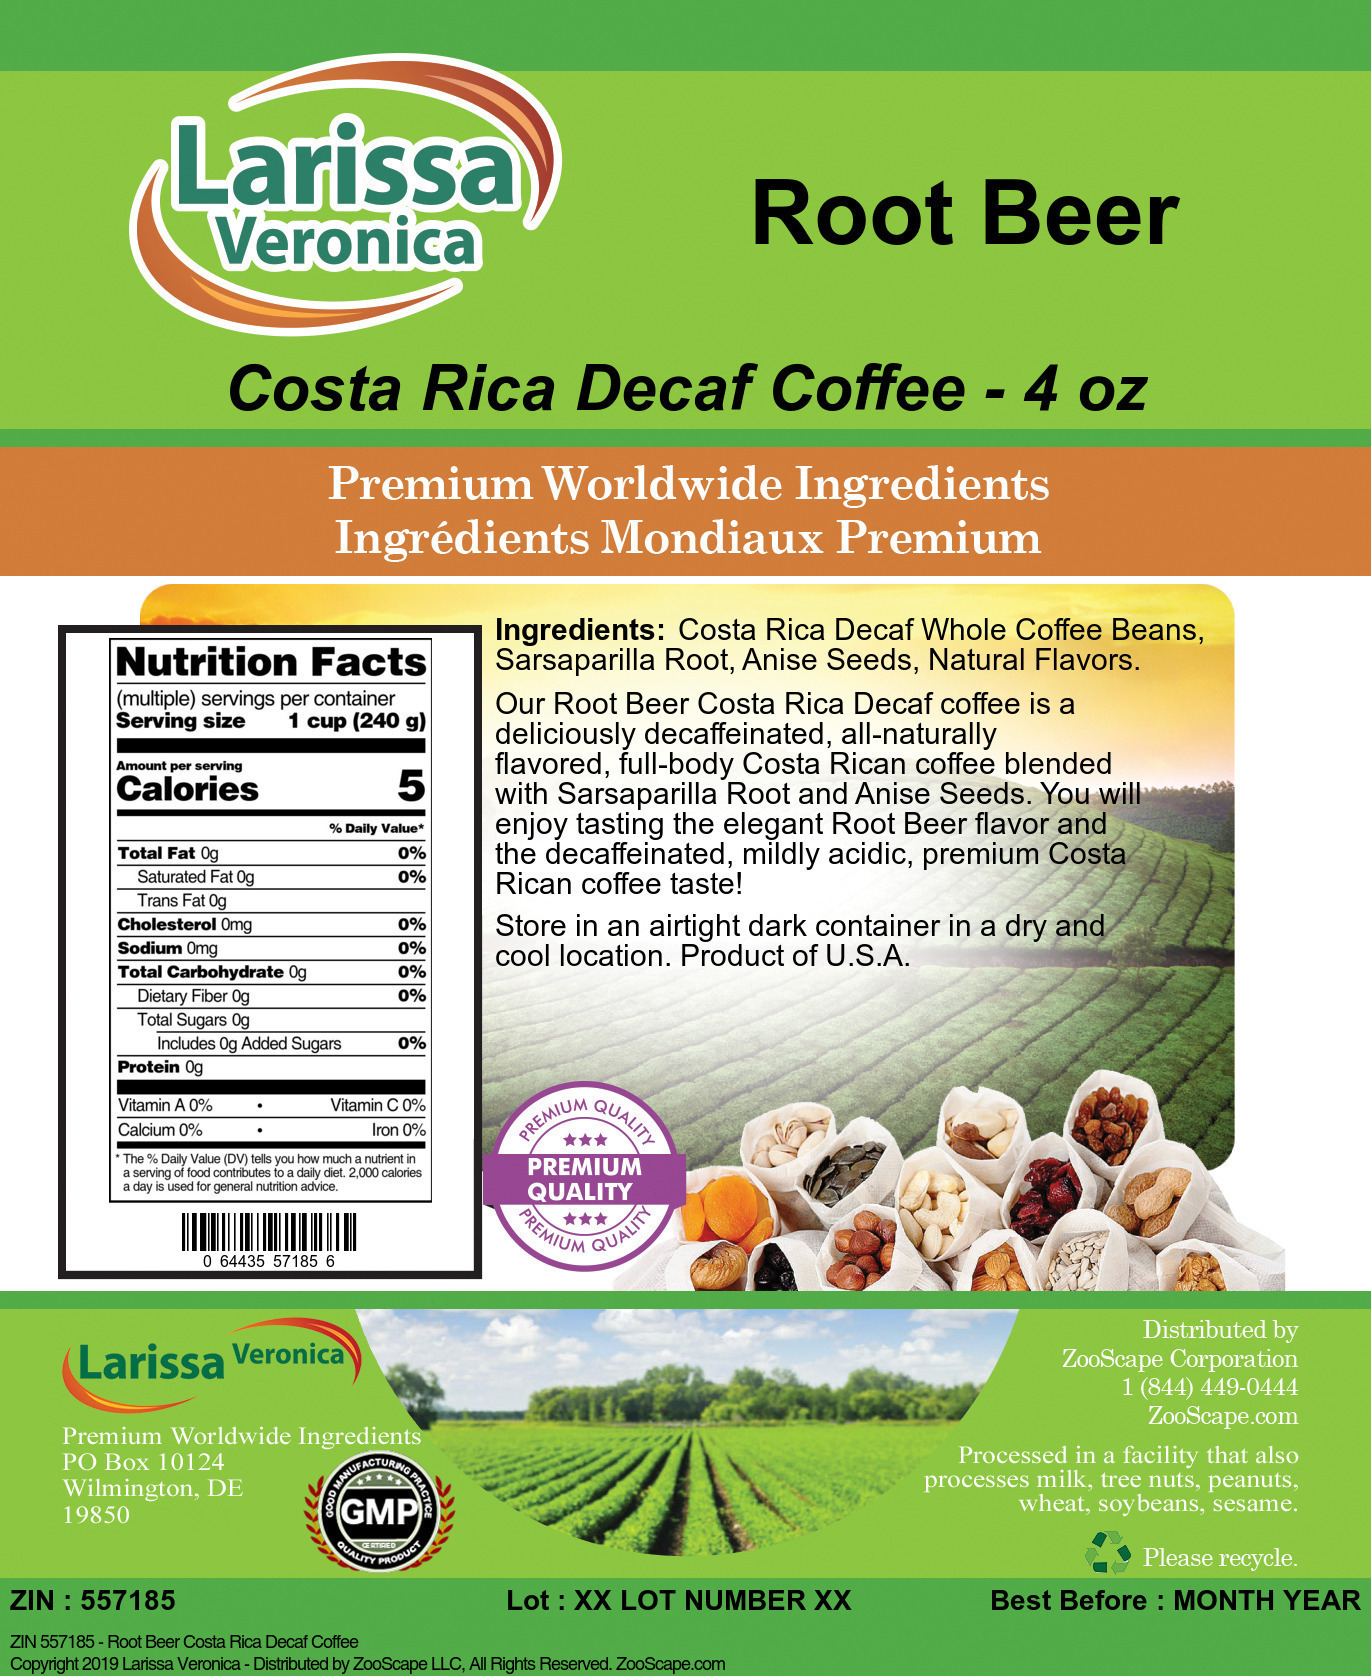 Root Beer Costa Rica Decaf Coffee - Label